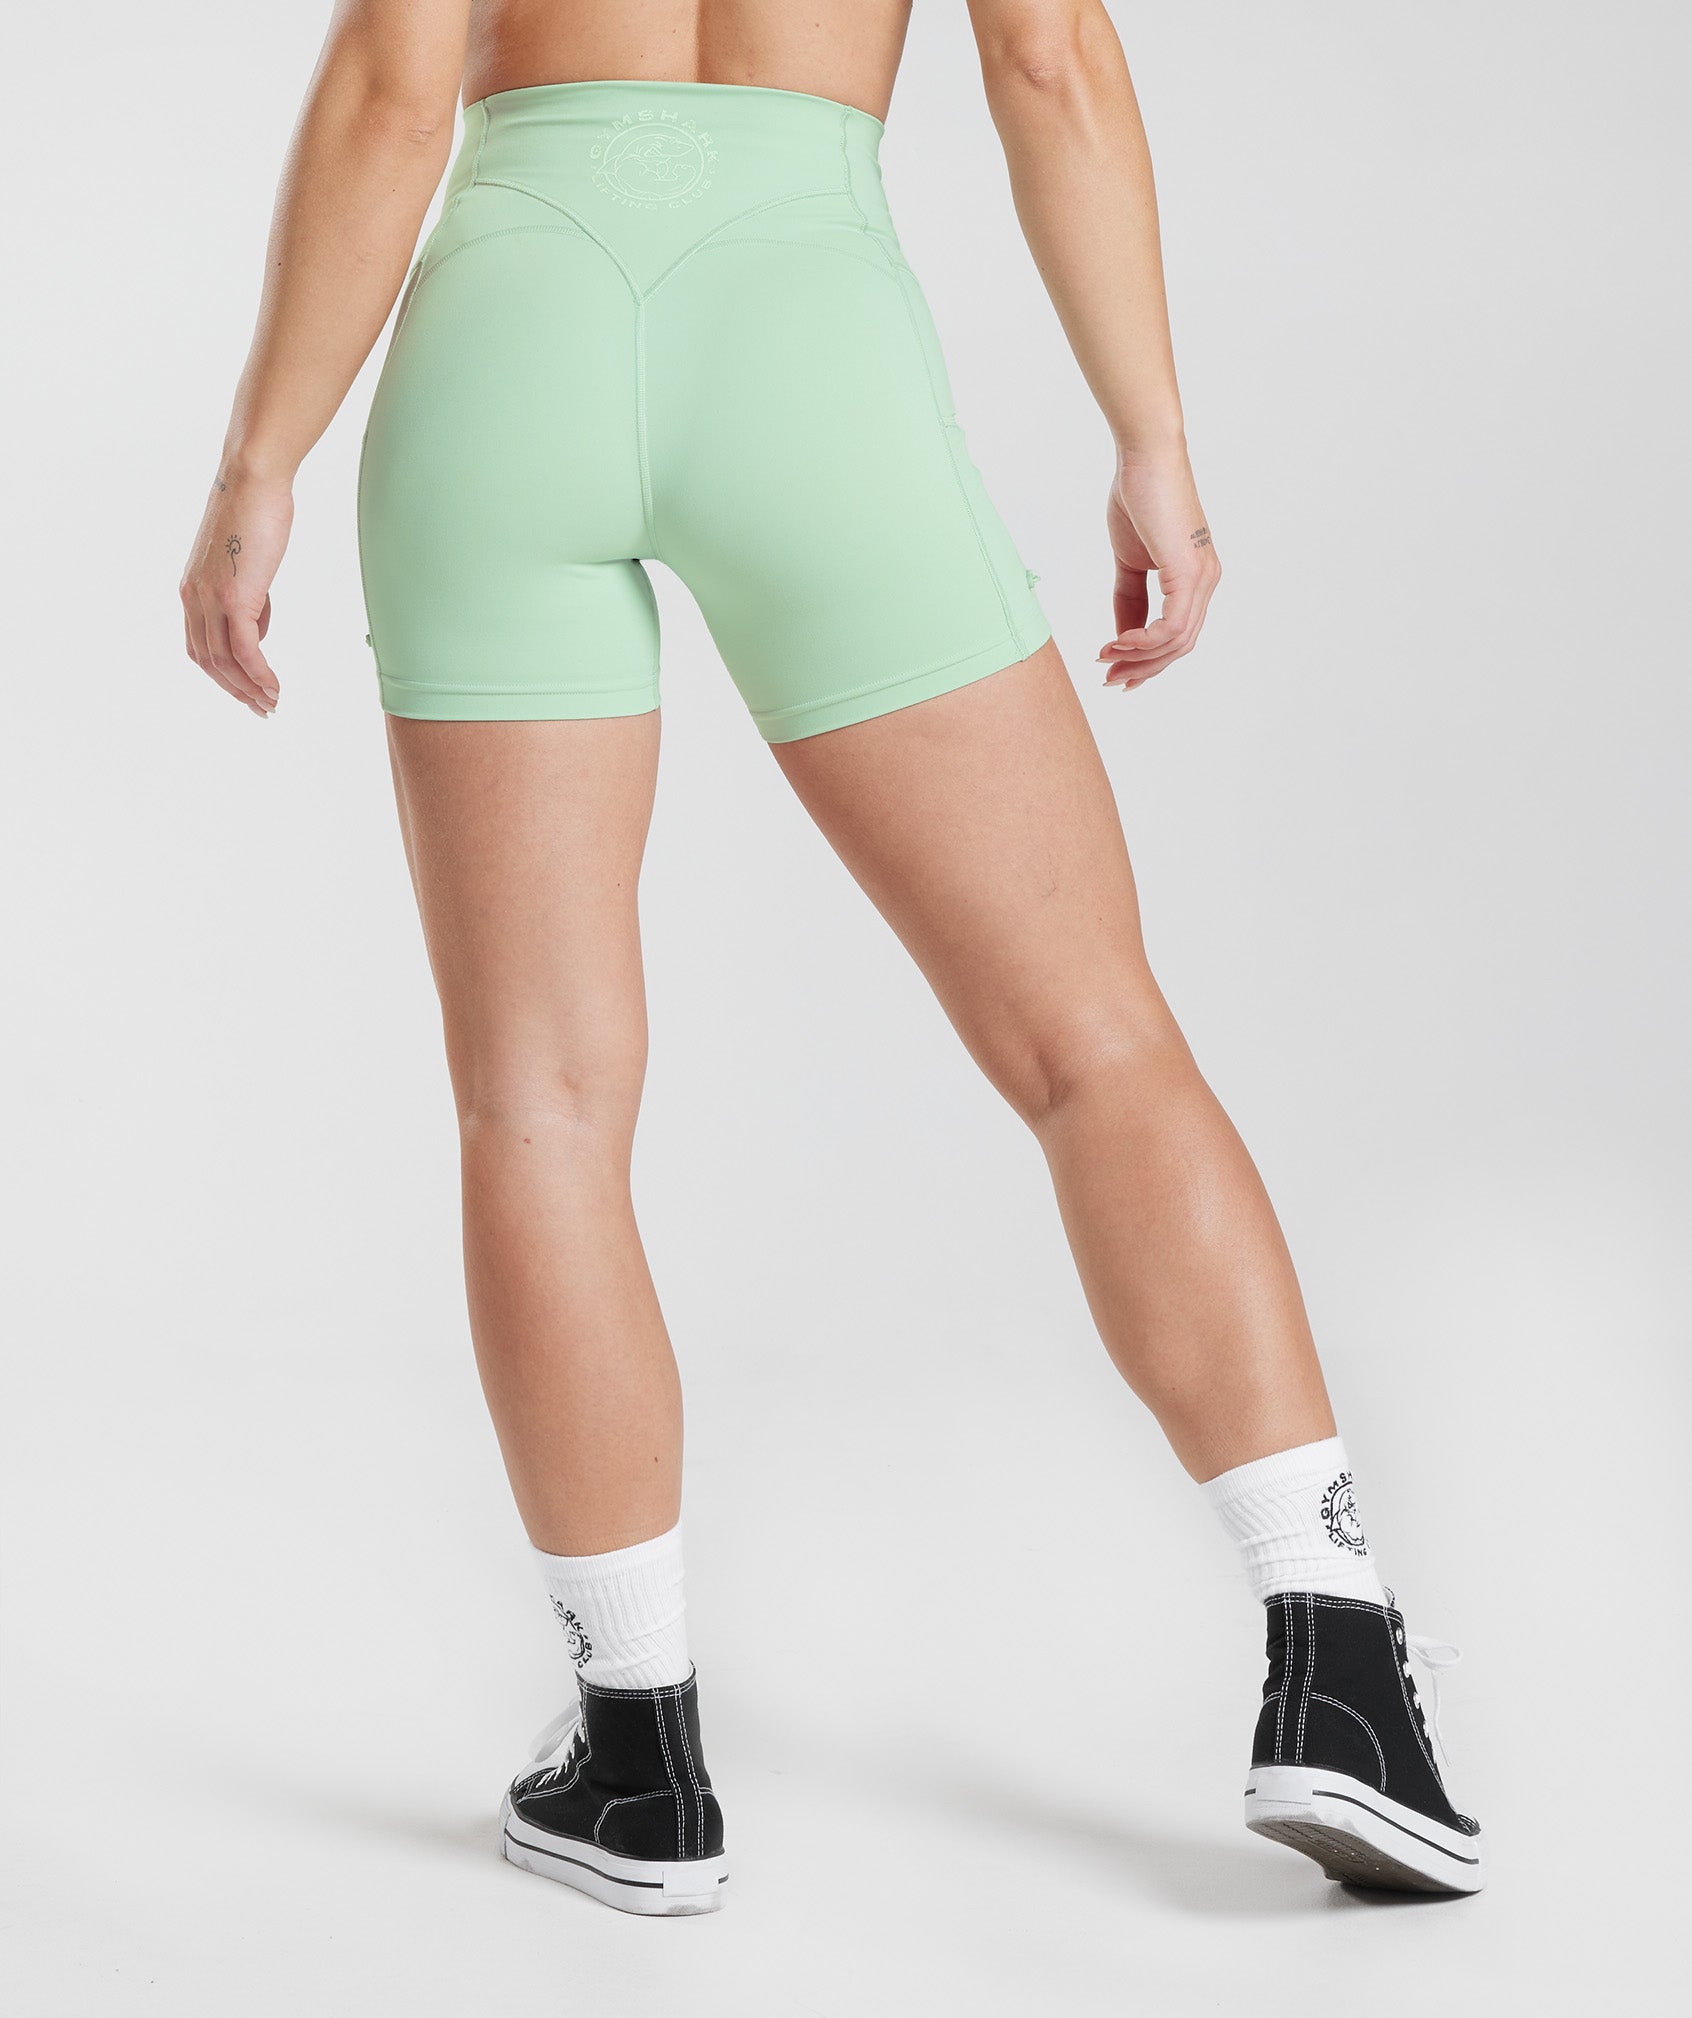 Legacy Ruched Tight Shorts in Mist Green - view 2